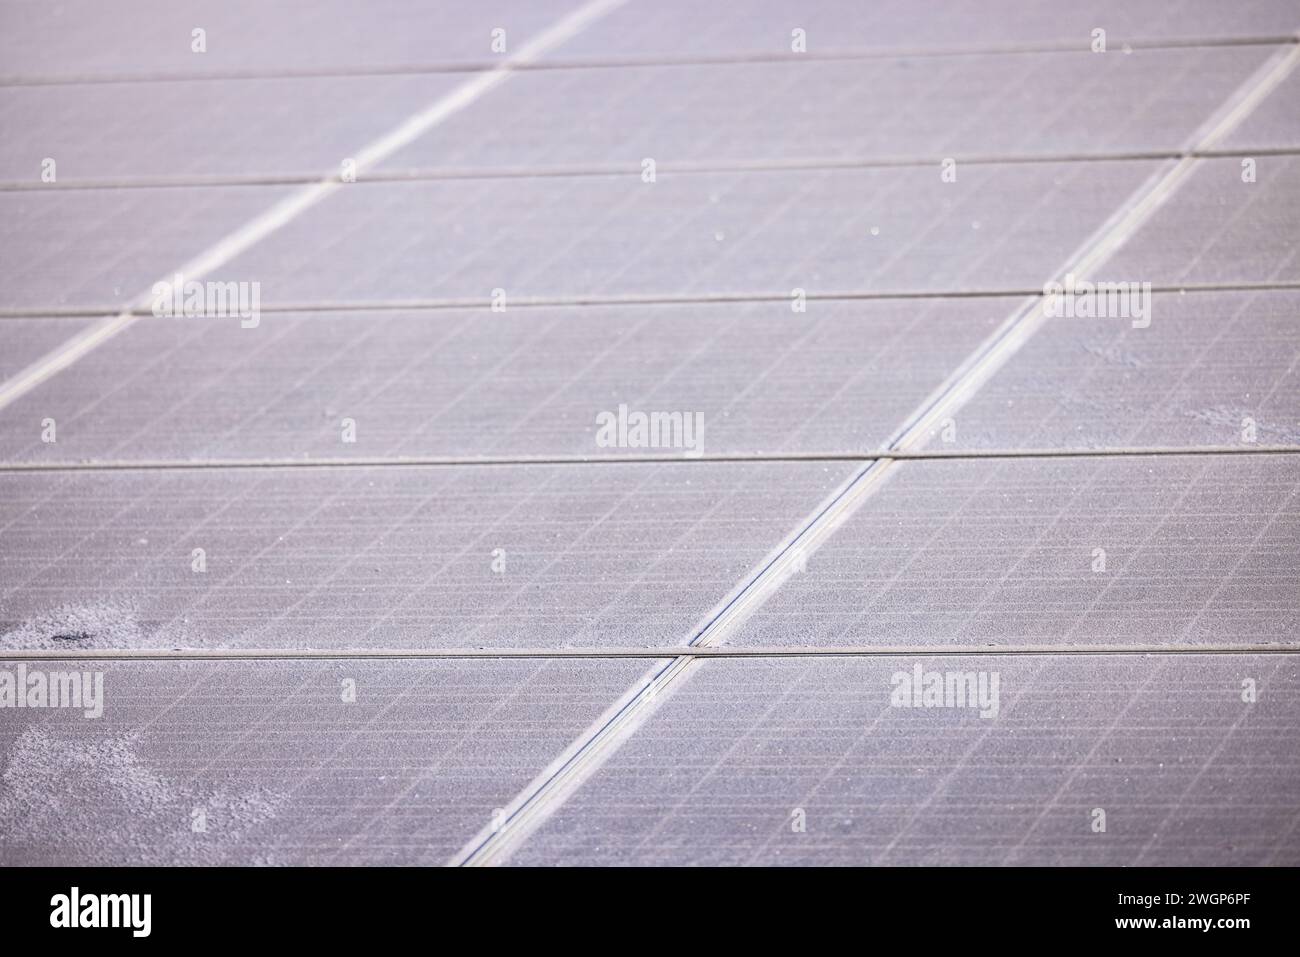 Individual iced solar panels of a PV system for the energy crisis exposed in sunlight in winter Stock Photo